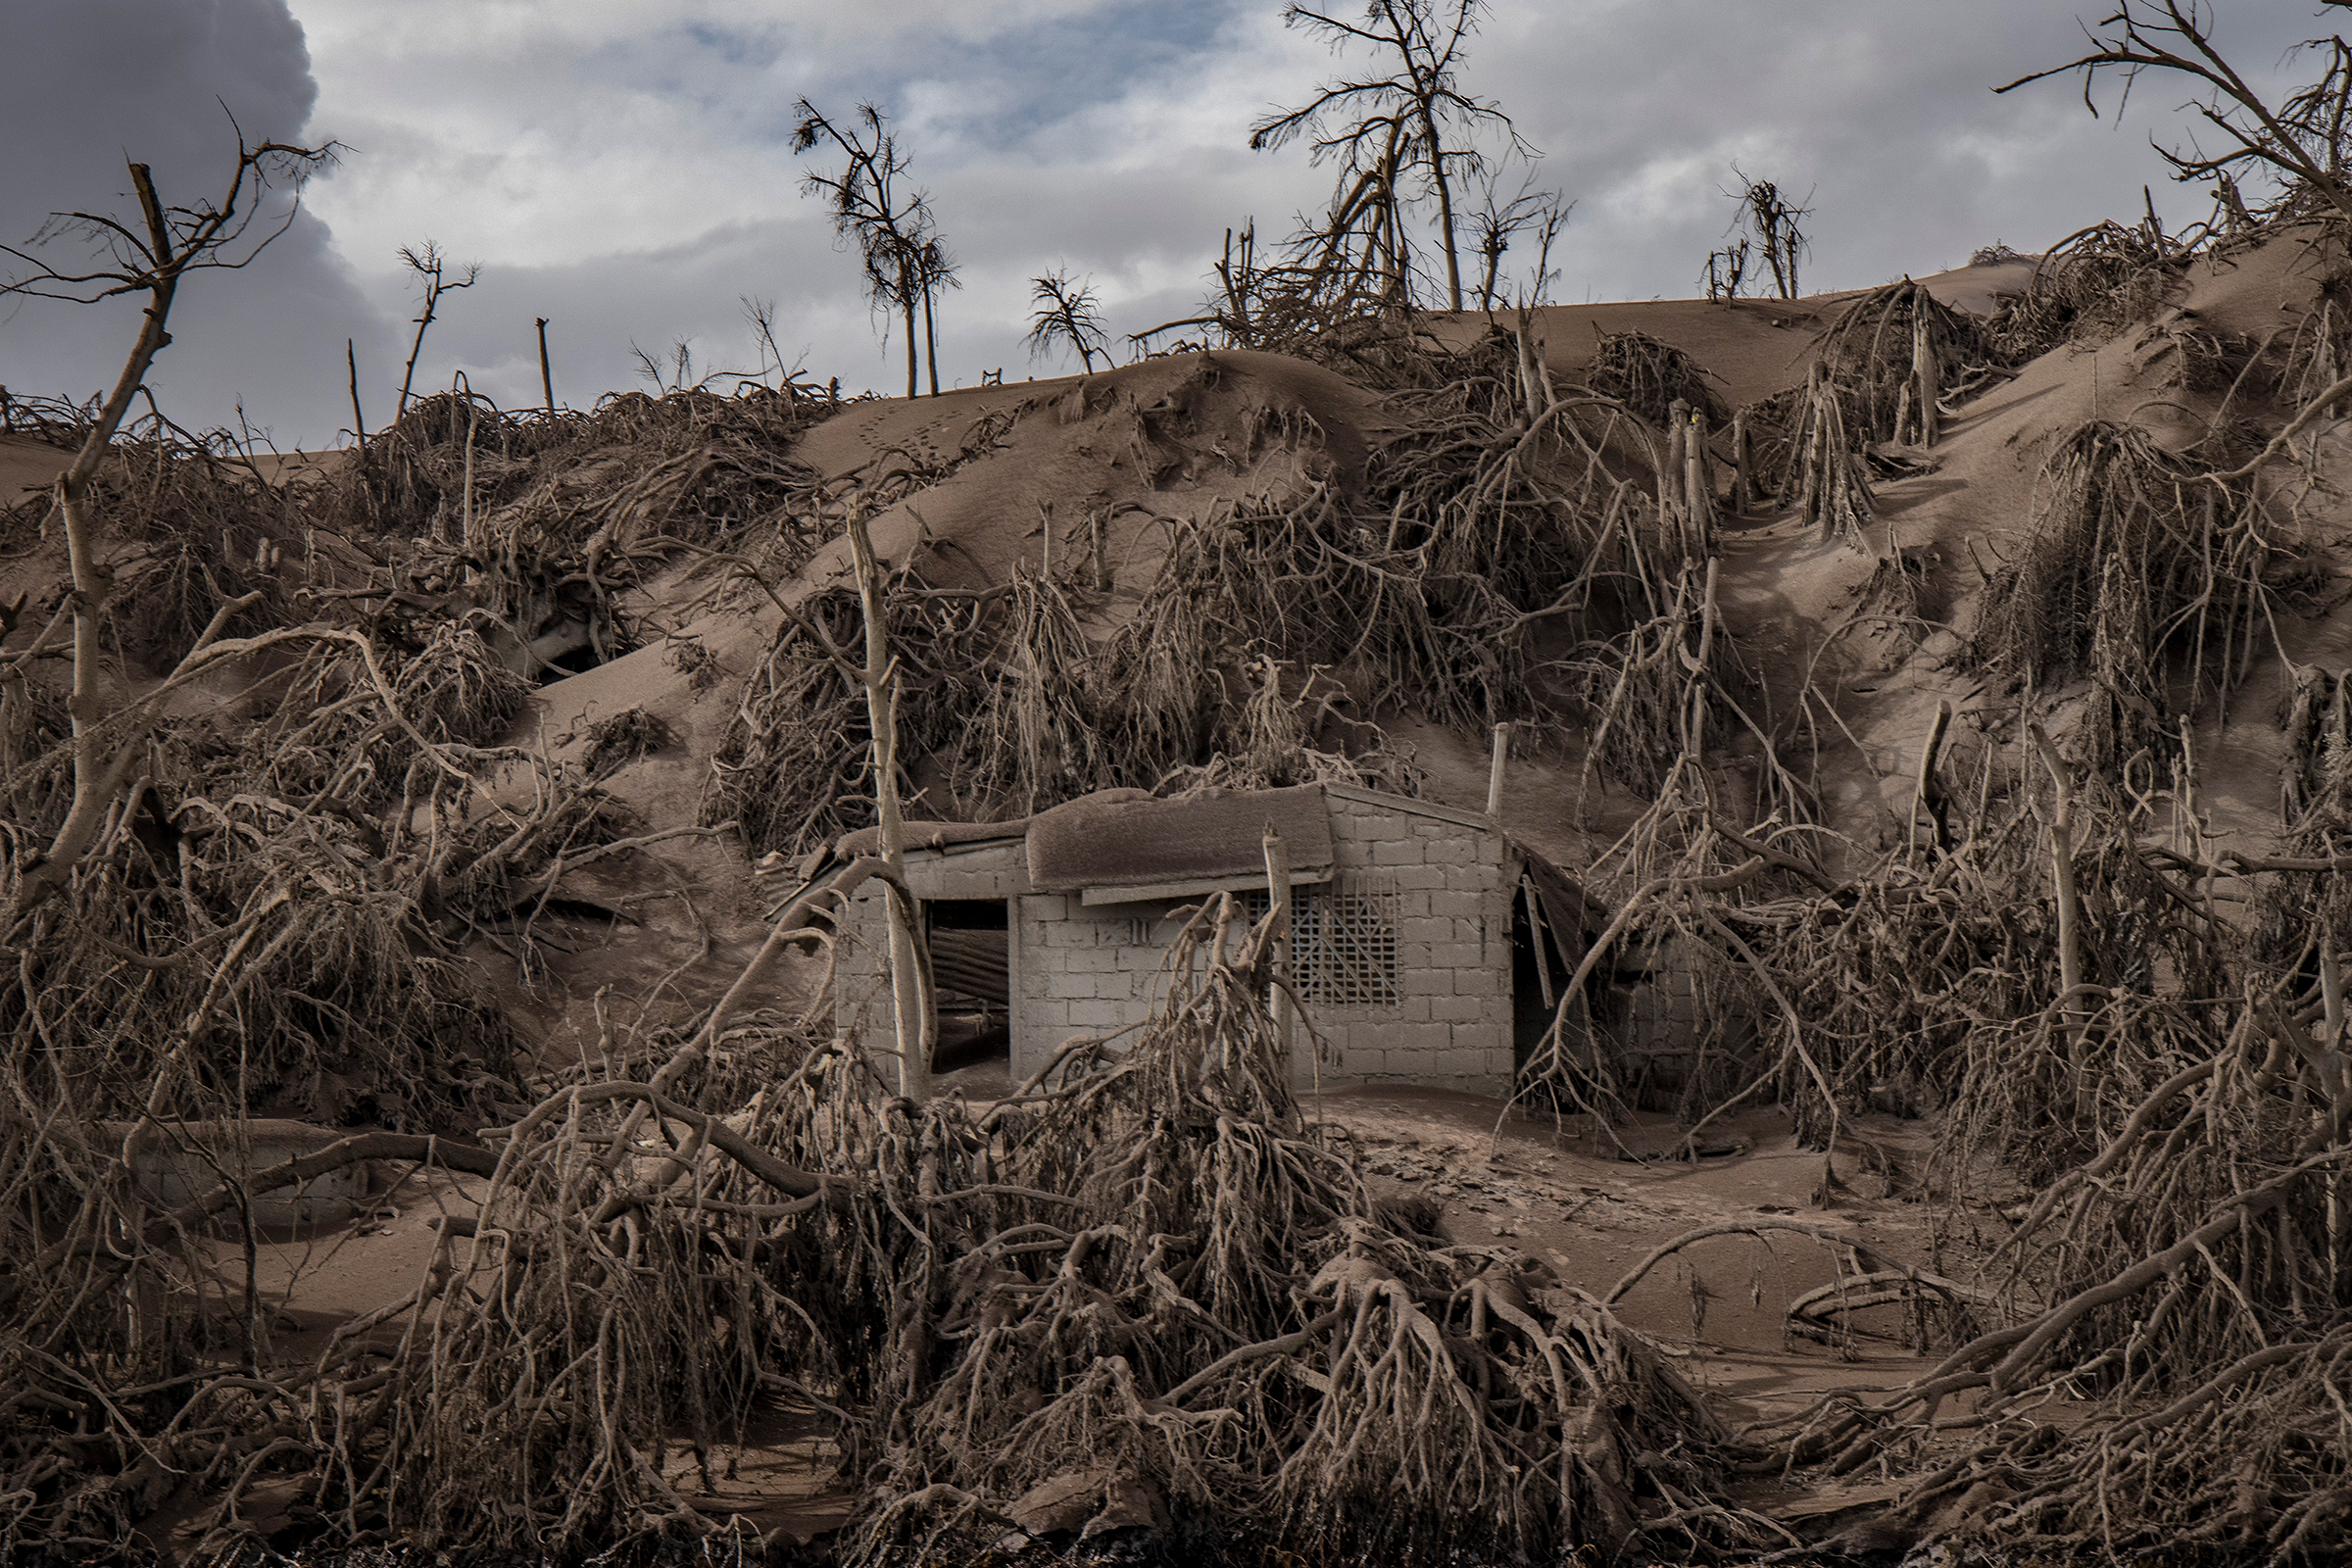 A house near the crater is buried in ash. (Ezra Acayan—Getty Images)